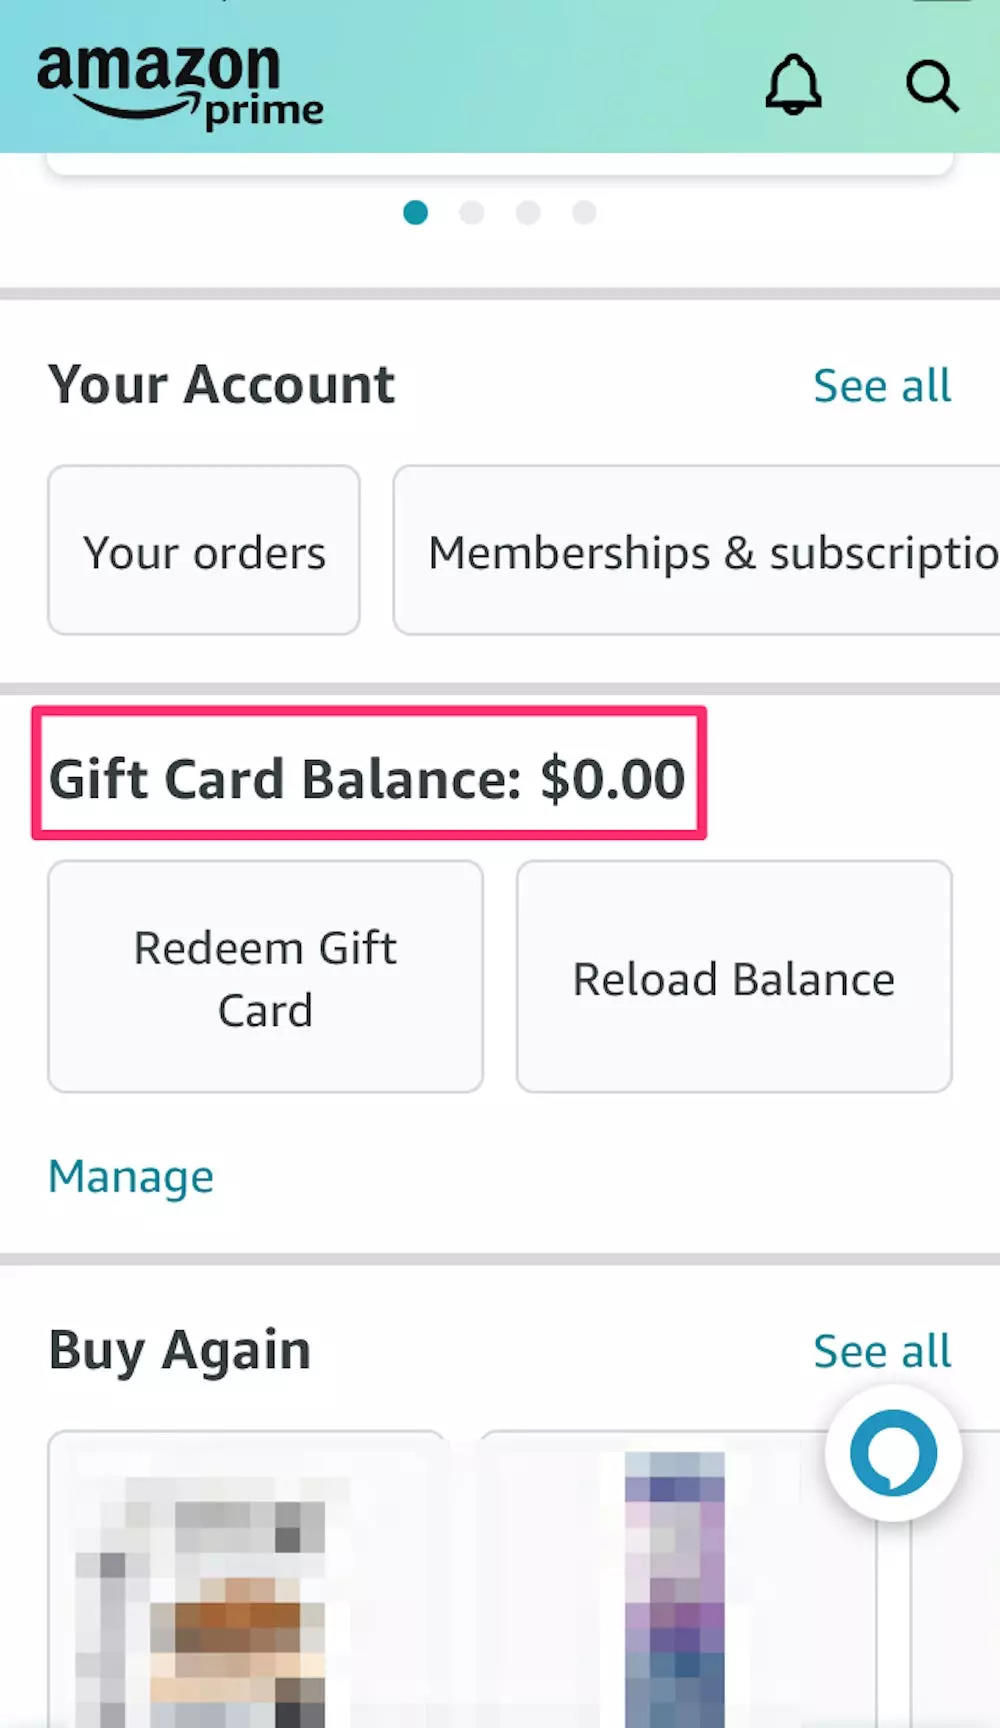 How To Use an Amex, Mastercard, or Visa Gift Card on Amazon